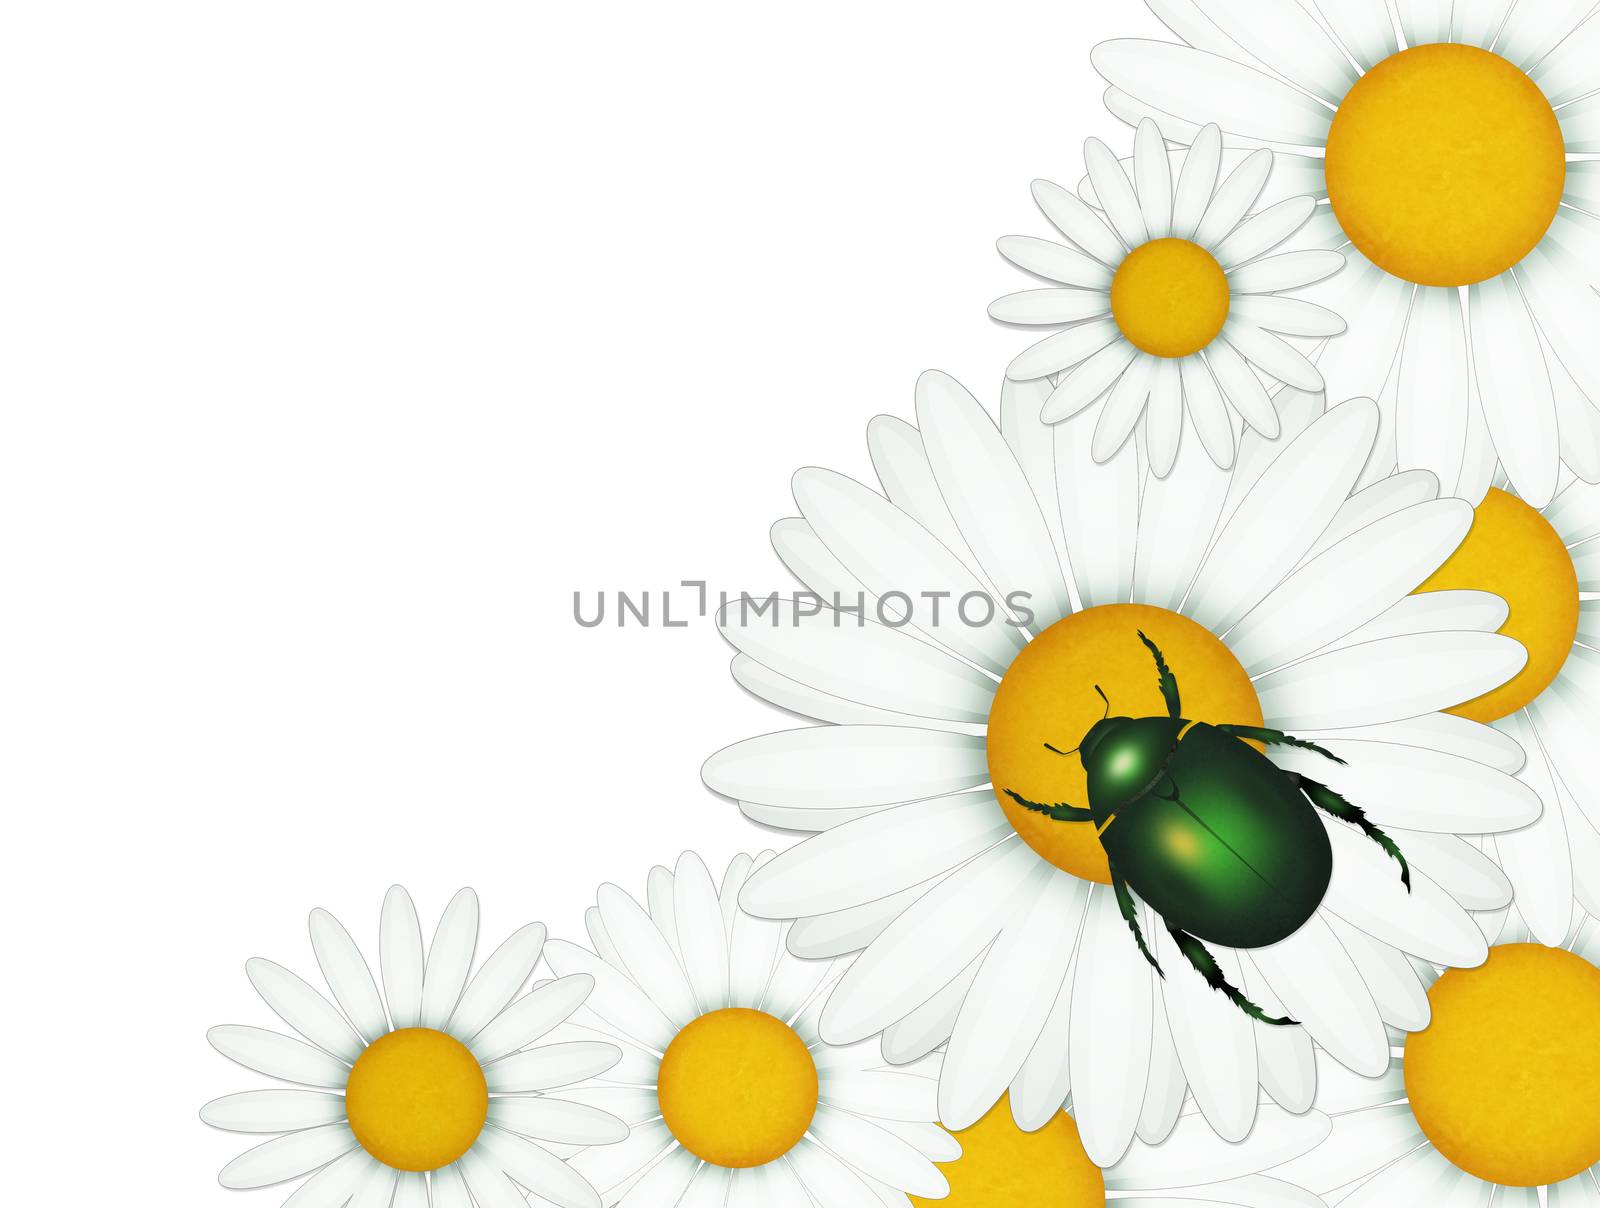 green cockchafer on daisies by adrenalina